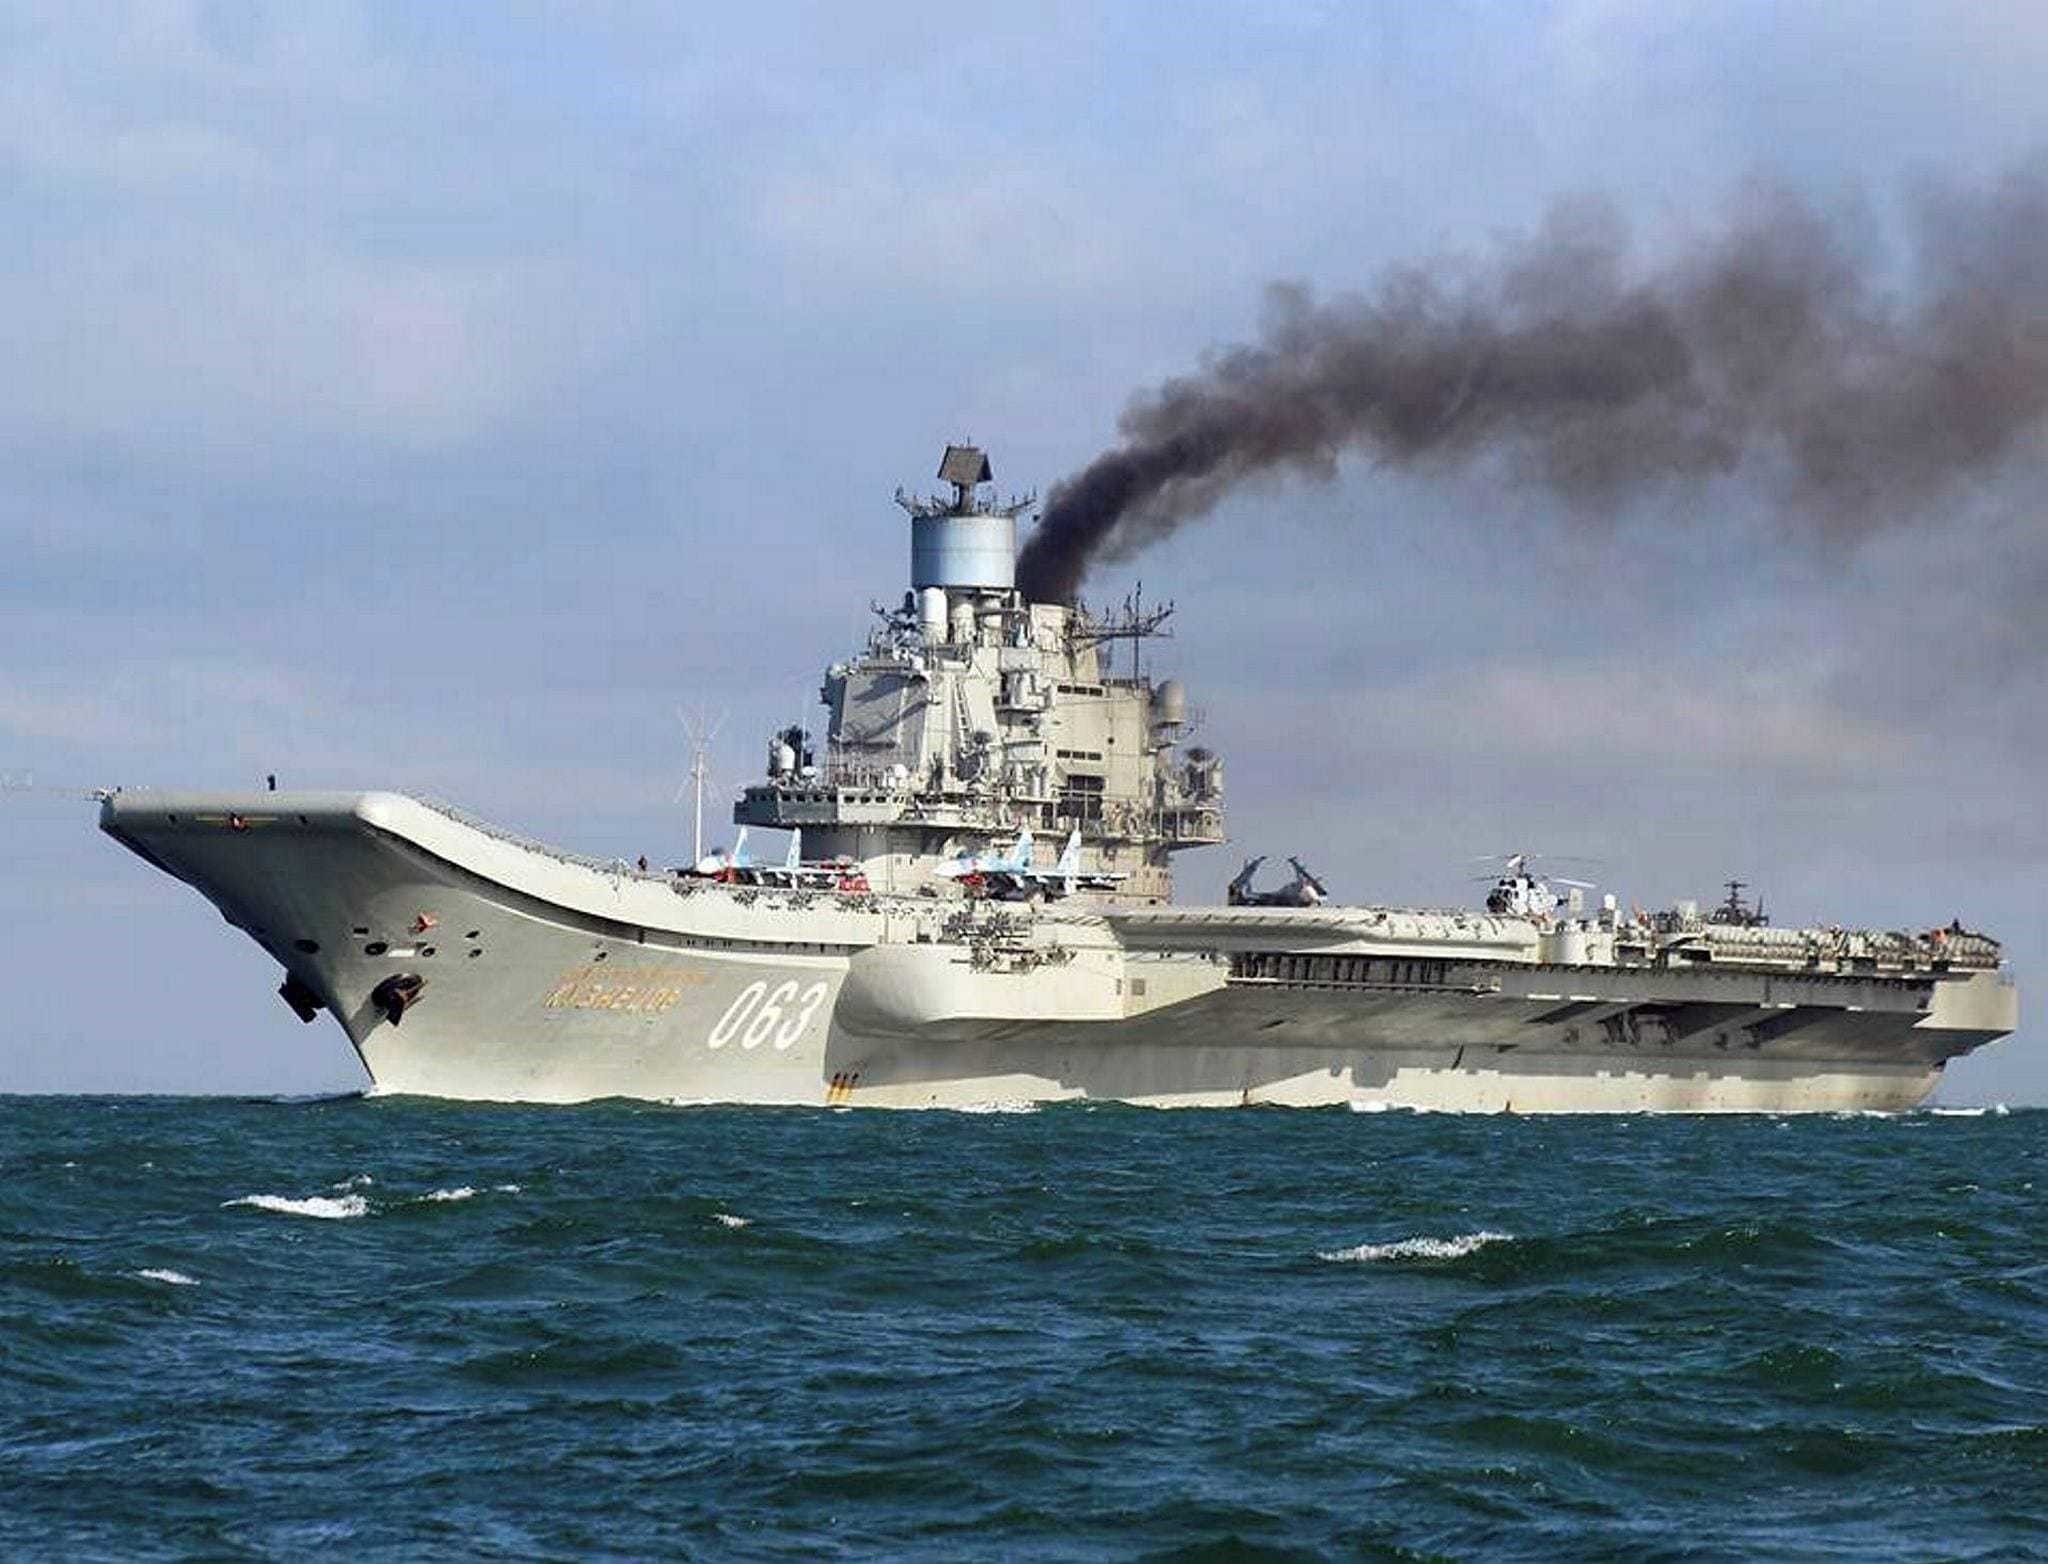 Russian aircraft carrier Admiral Kuznetsov in the English Channel on Oct. 21.